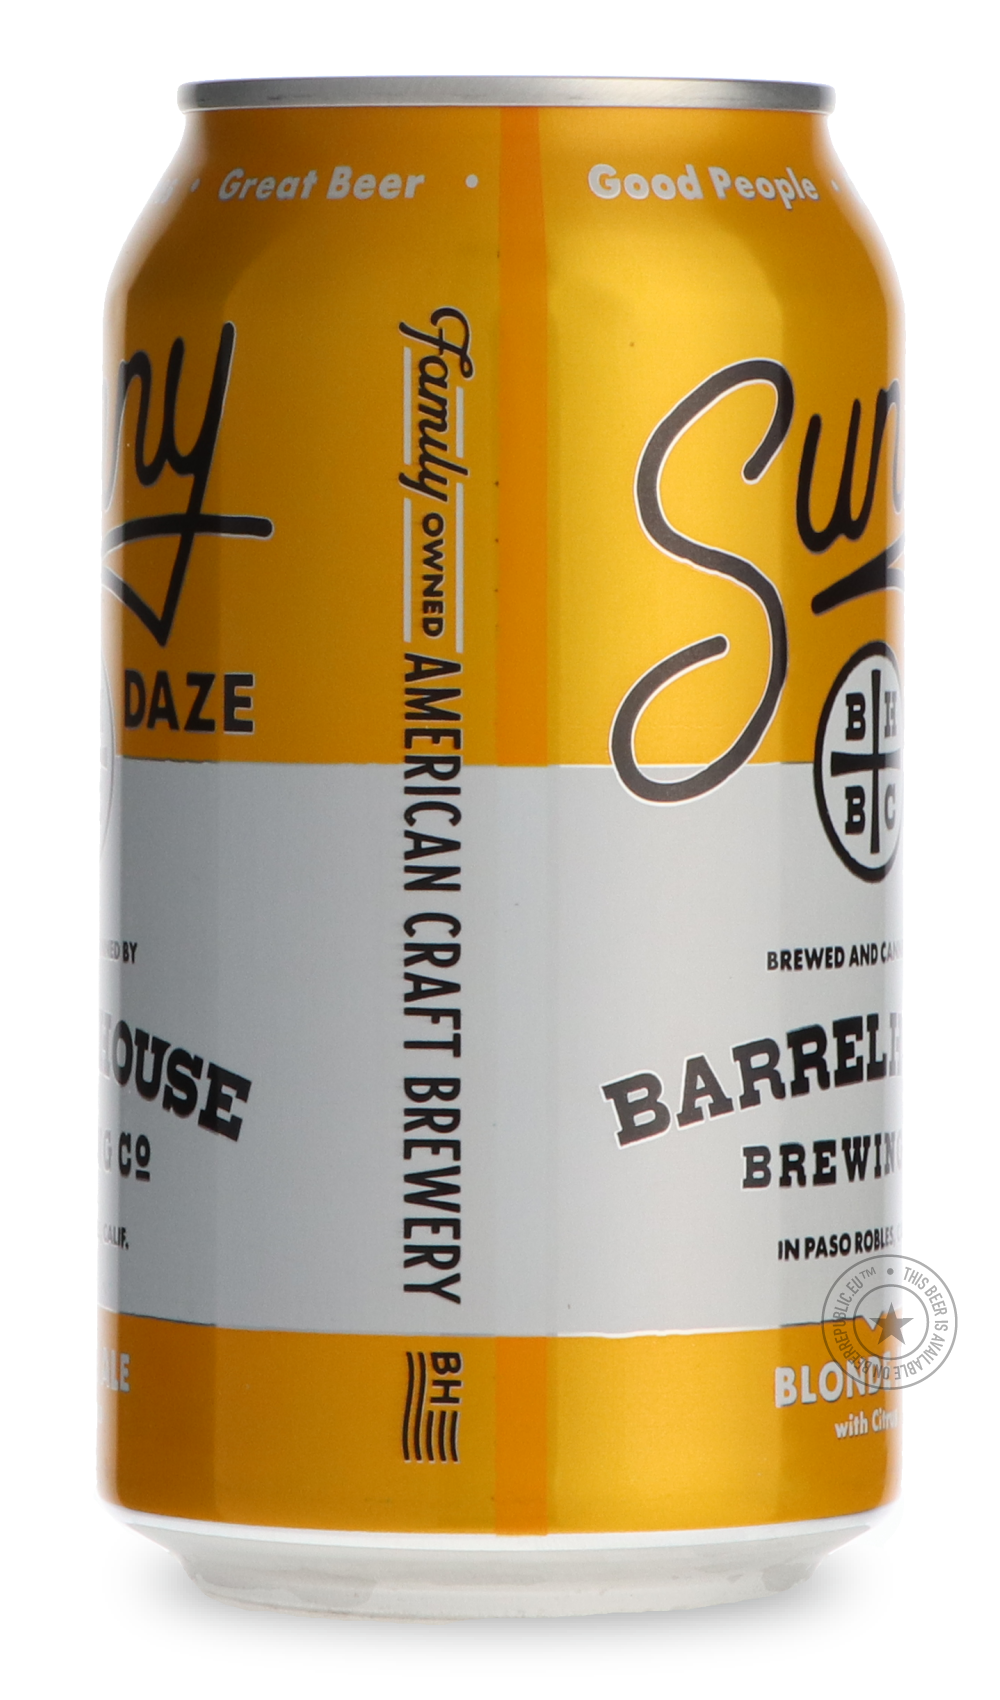 -BarrelHouse- Sunny Daze-Pale- Only @ Beer Republic - The best online beer store for American & Canadian craft beer - Buy beer online from the USA and Canada - Bier online kopen - Amerikaans bier kopen - Craft beer store - Craft beer kopen - Amerikanisch bier kaufen - Bier online kaufen - Acheter biere online - IPA - Stout - Porter - New England IPA - Hazy IPA - Imperial Stout - Barrel Aged - Barrel Aged Imperial Stout - Brown - Dark beer - Blond - Blonde - Pilsner - Lager - Wheat - Weizen - Amber - Barley 